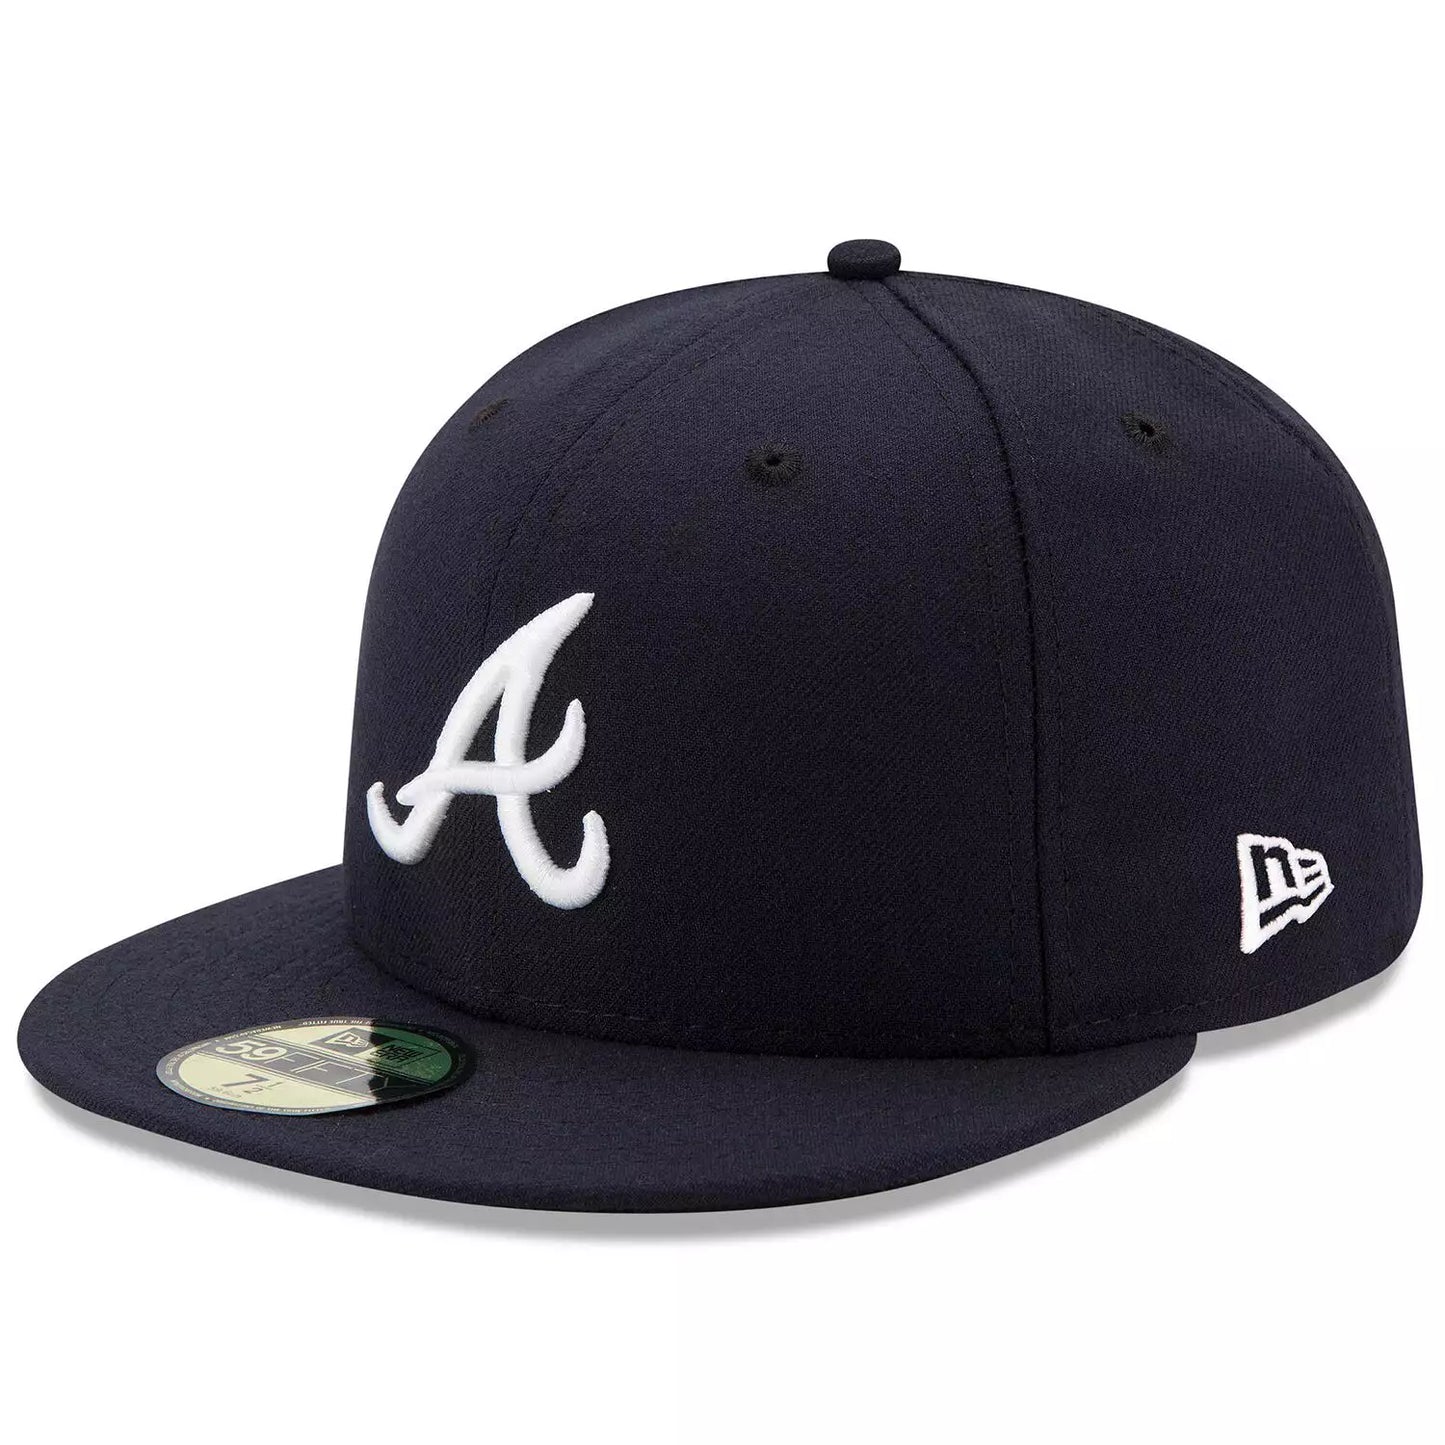 Atlanta Braves Navy New Era Road Authentic Collection On-Field 59FIFTY Fitted Hat - Size: 6 7/8